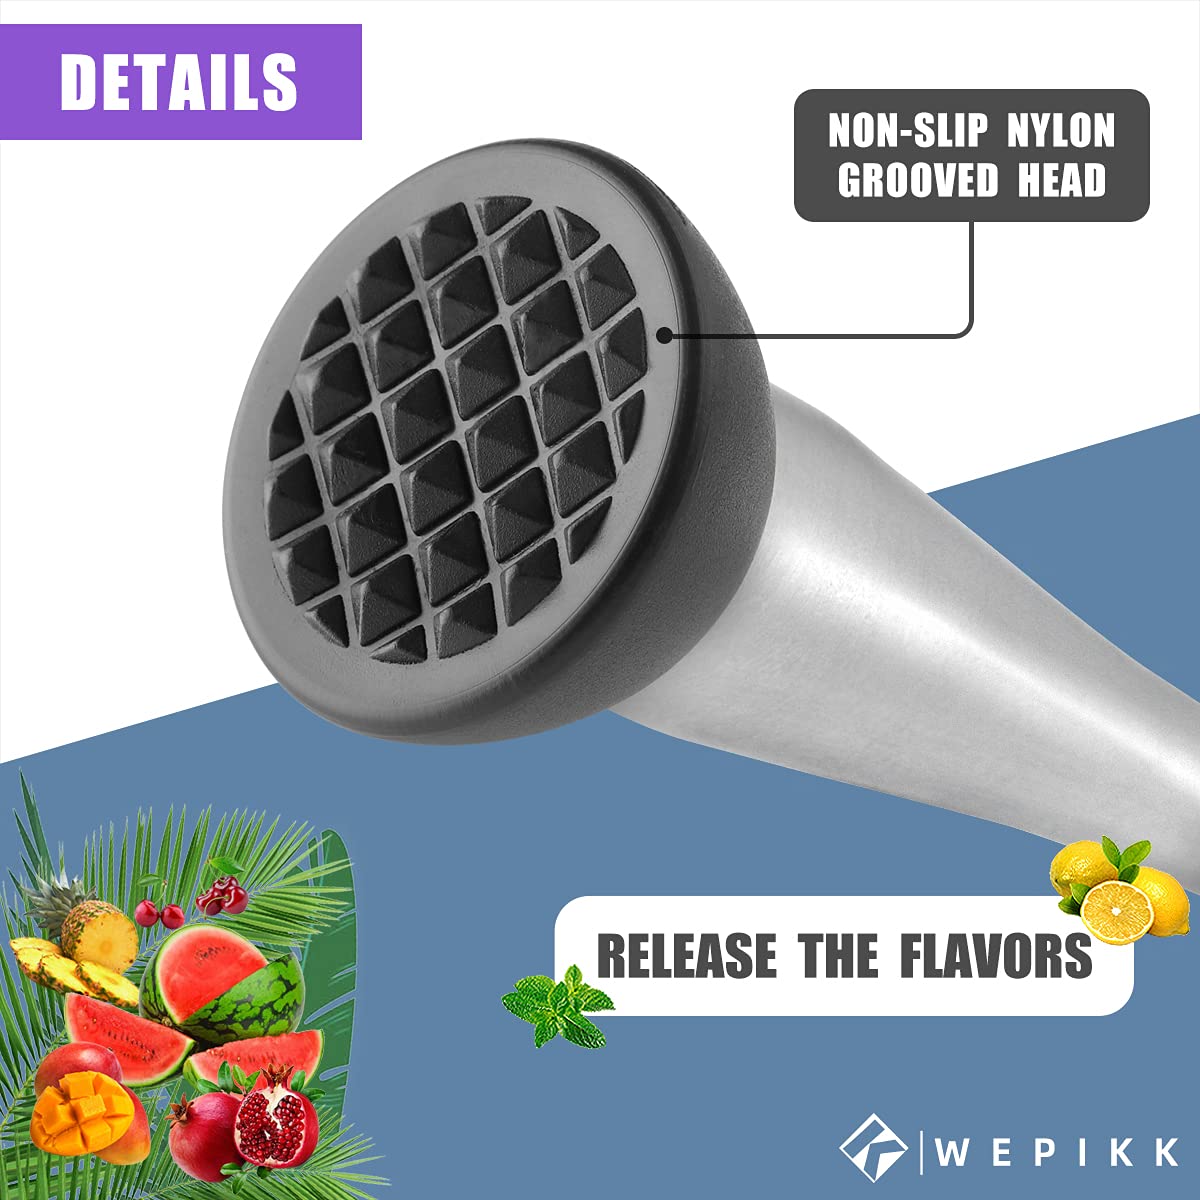 Wepikk Cocktail Muddler Stainless Steel 8.7 Inch Fruit Ice Crusher Bar Tools Bartender Set 1 Pcs for Mojito Mint and Other Fruit Based Drinks